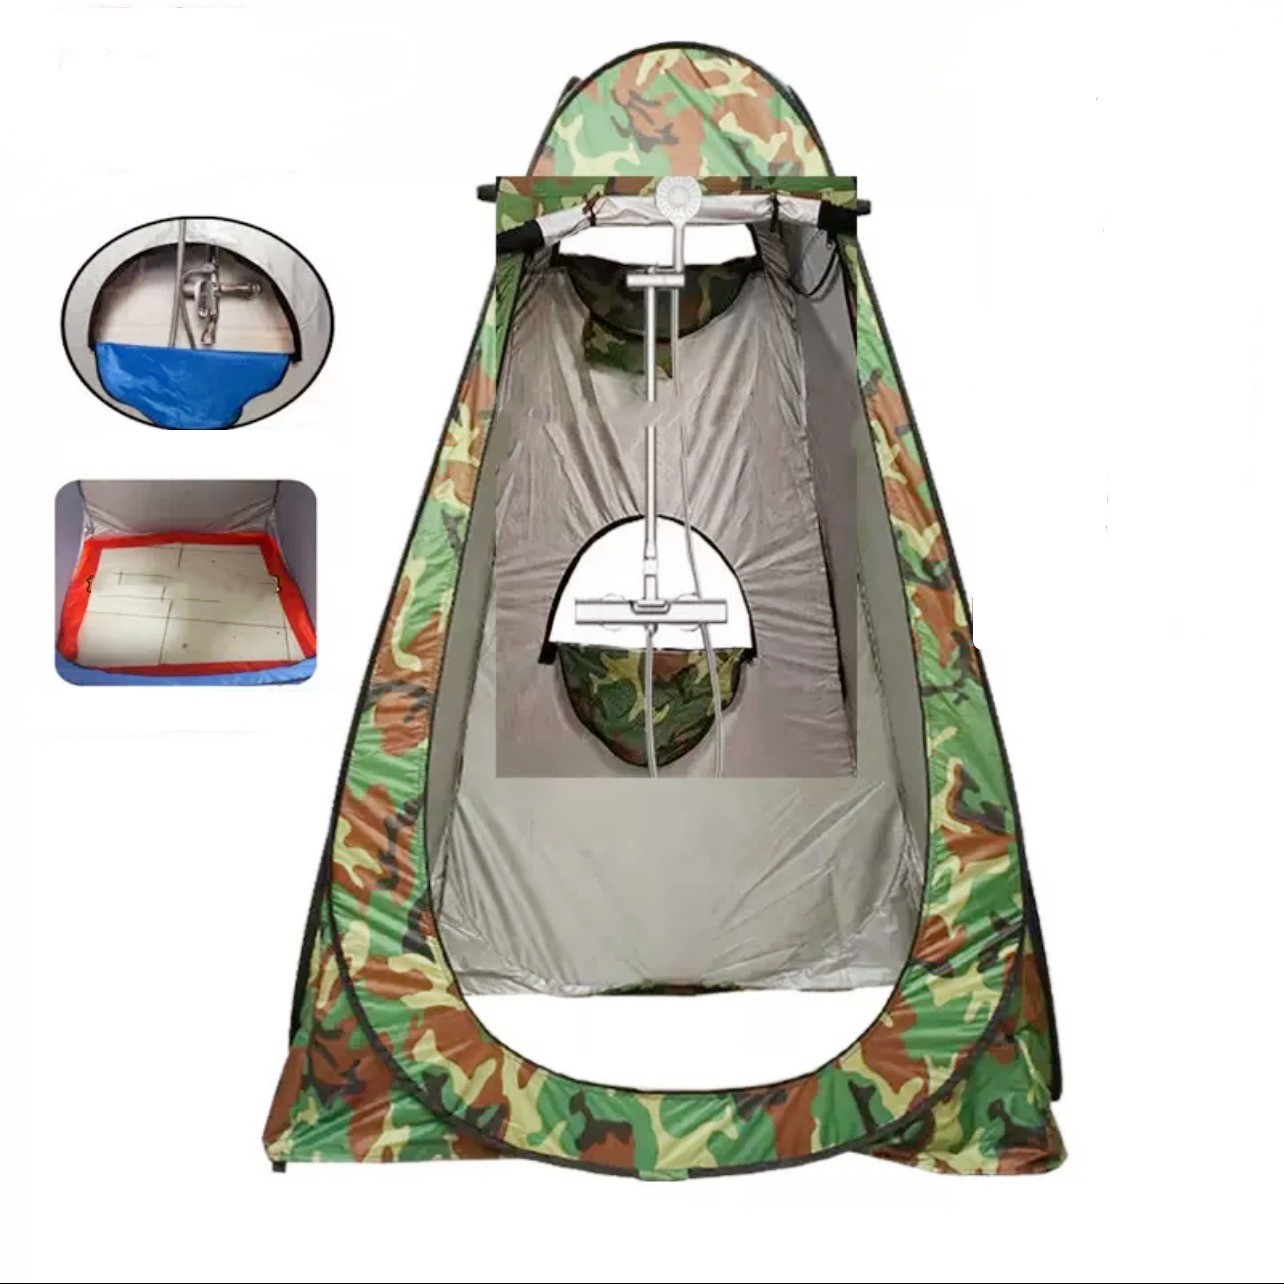 Outdoor Changing Clothes Shower Tent Camp Toilet Pop-up Room Privacy Shelter Multi-use For Beach, camping